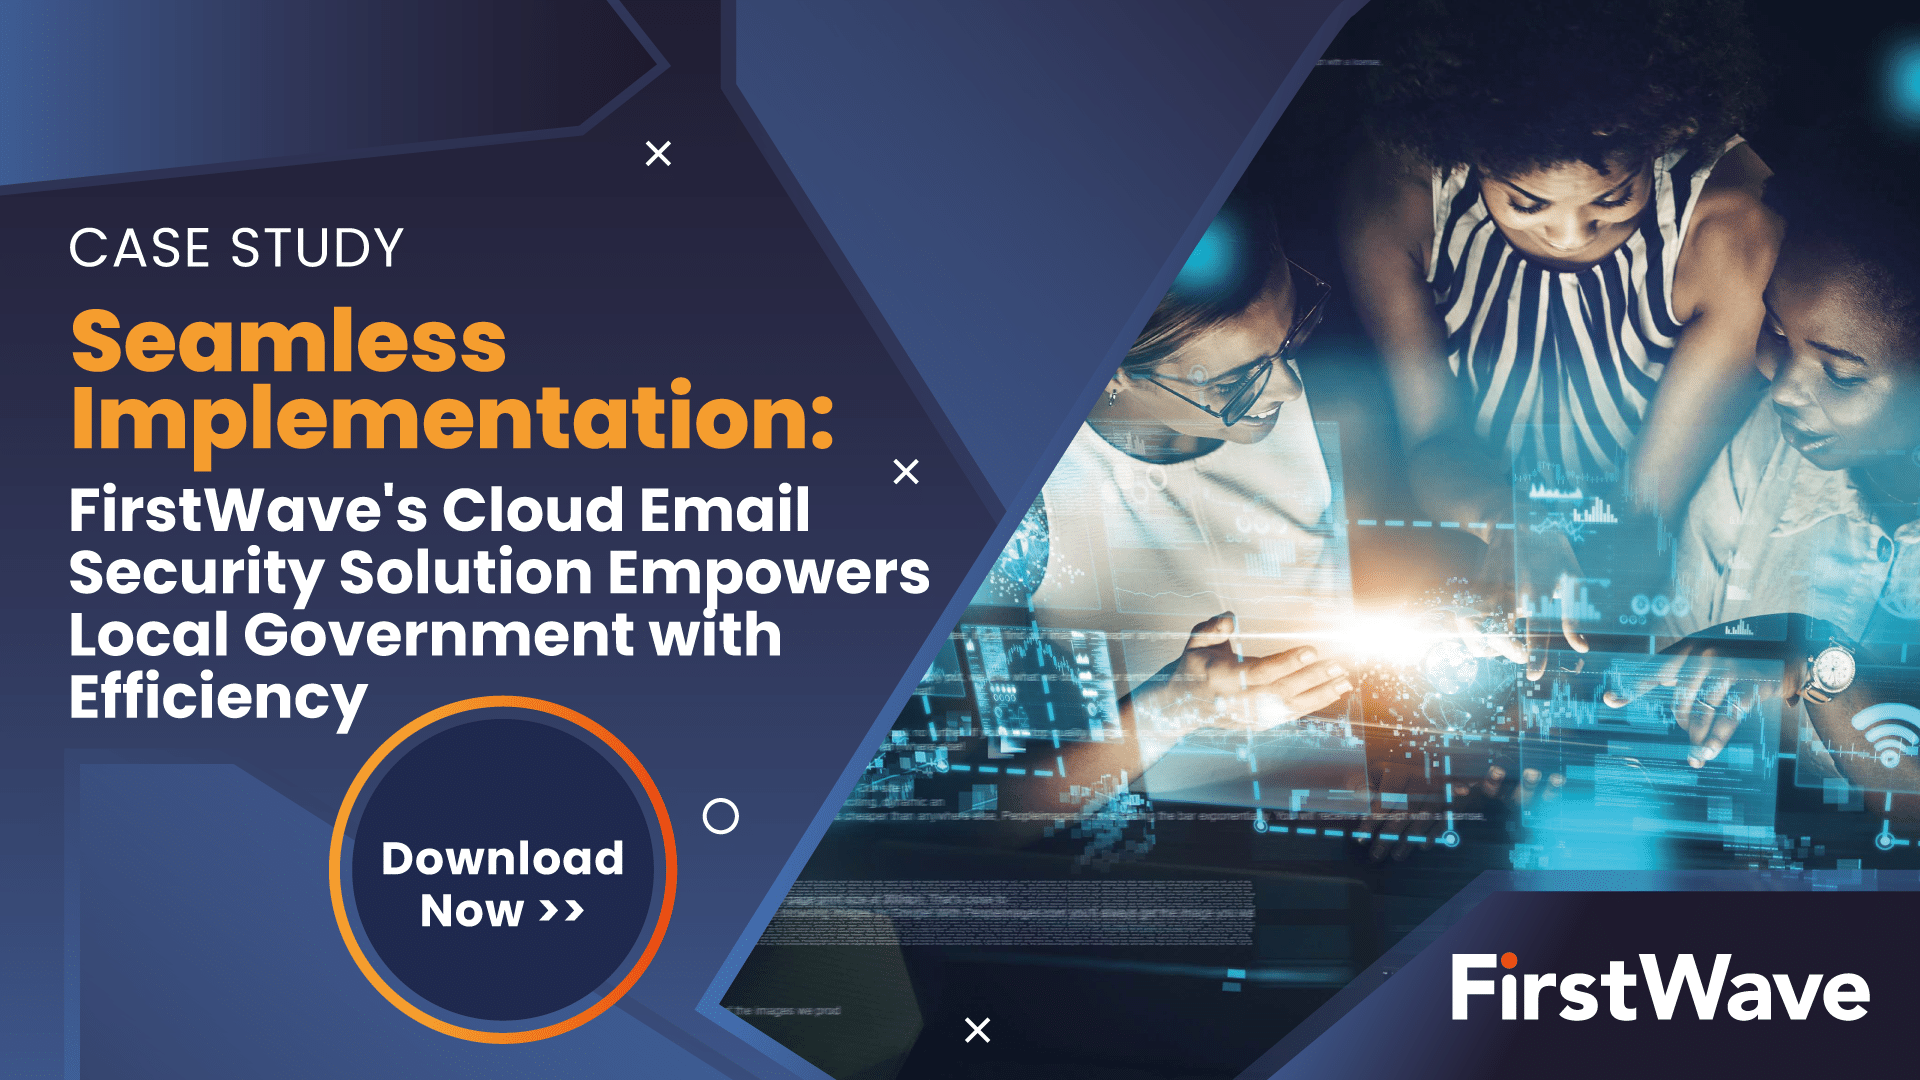 Easy & Quick Deployment of An Efficient Cloud Email Security Solution